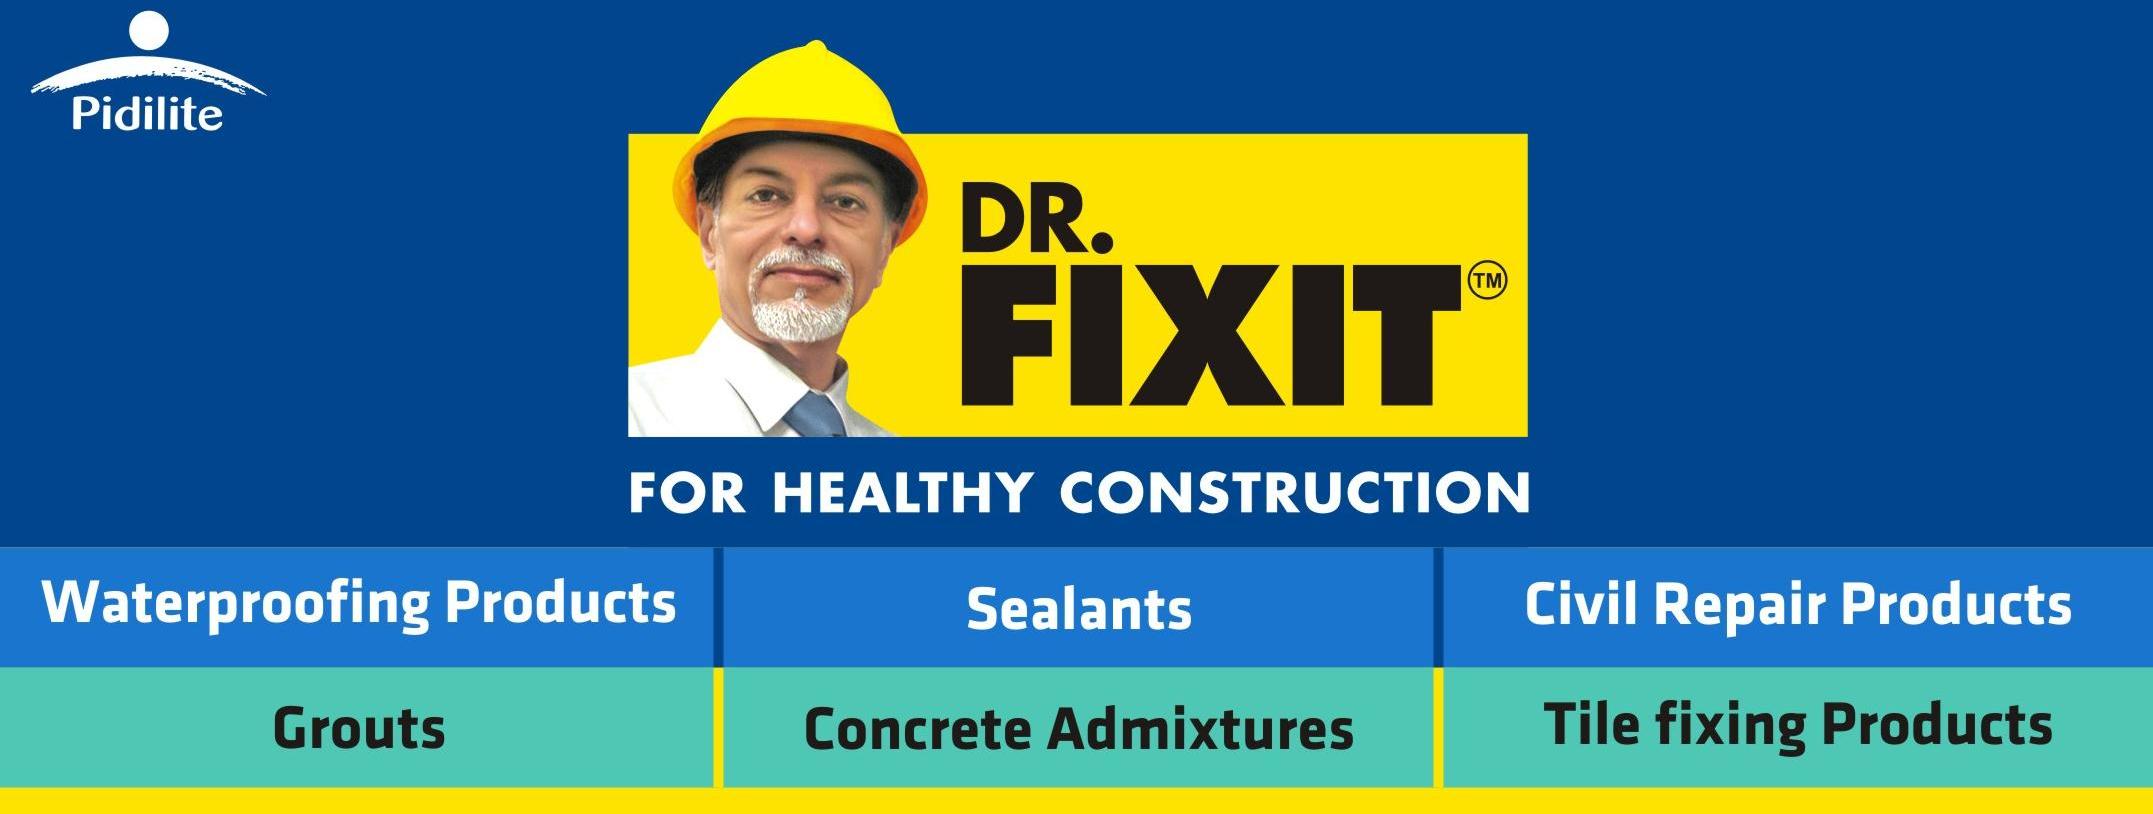 Dr. Fixit Water Proofing Chemicals